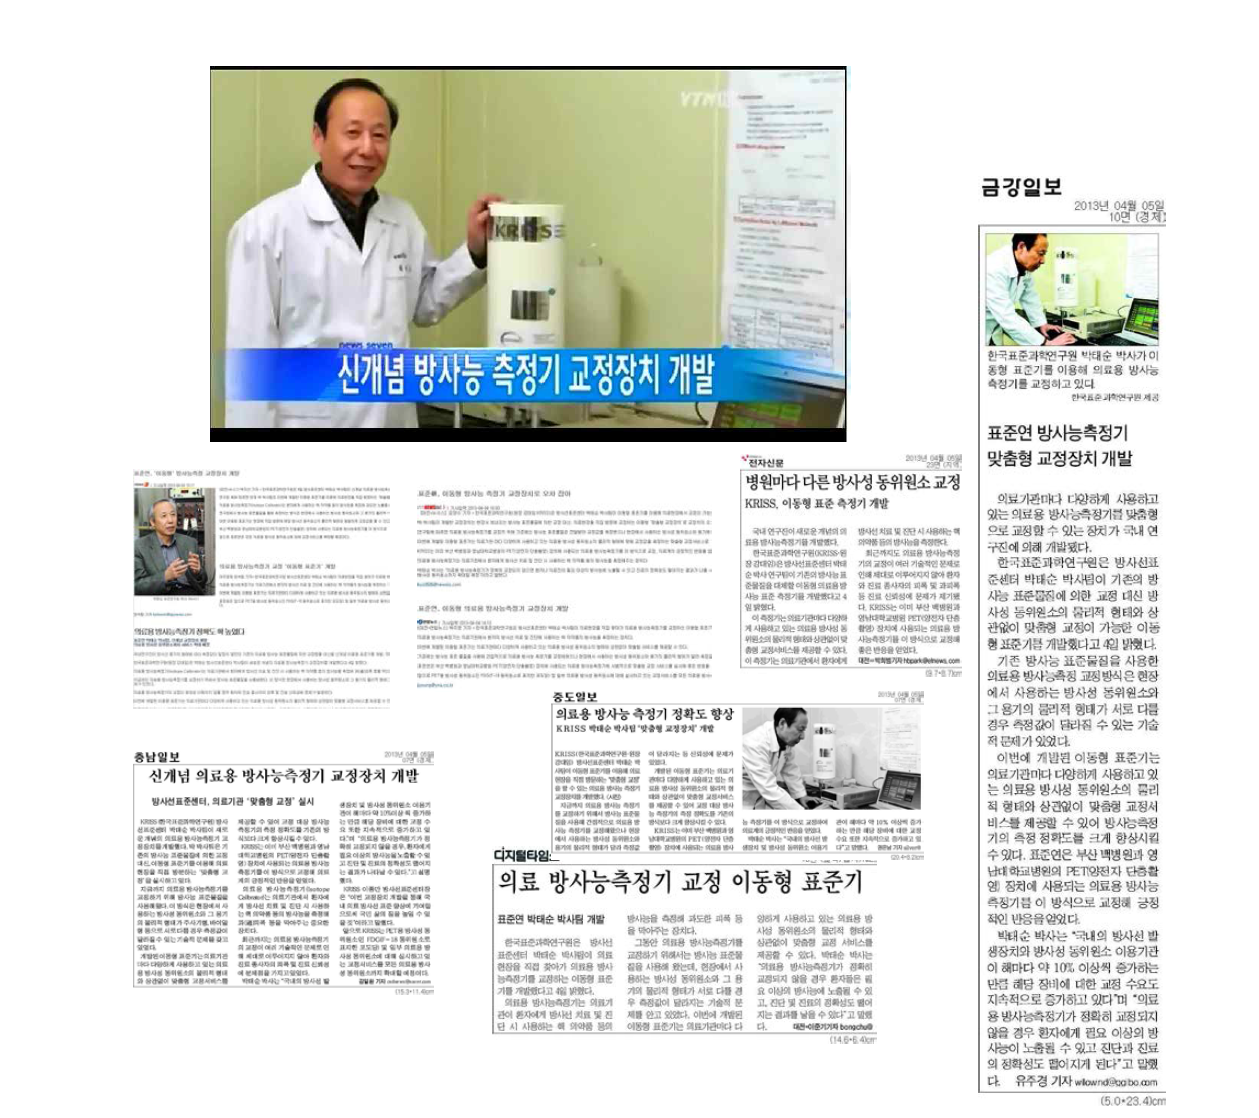 Advertisement of the reserch outcomes appeared in YTN and other daily newspapers